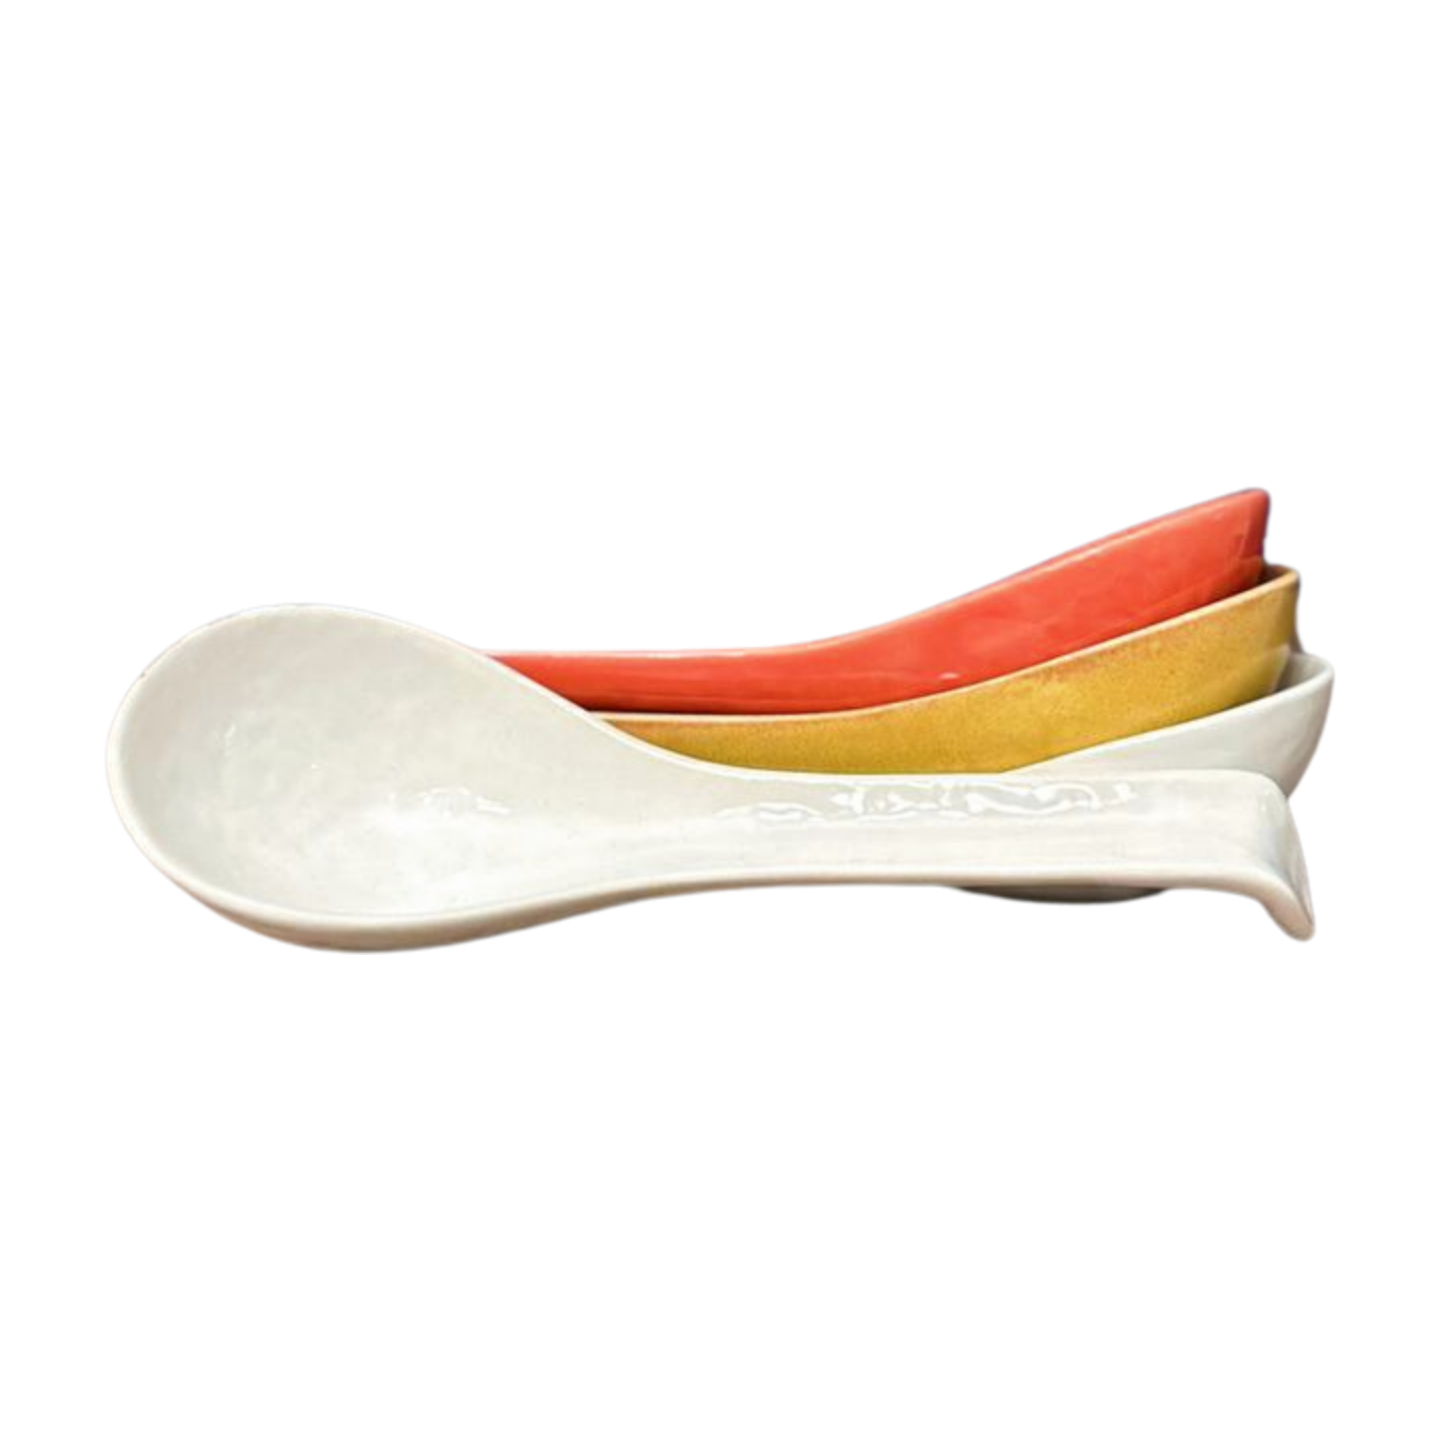 Set of stacked Japanese Soup Spoons in three colors: white, coral, and yellow.